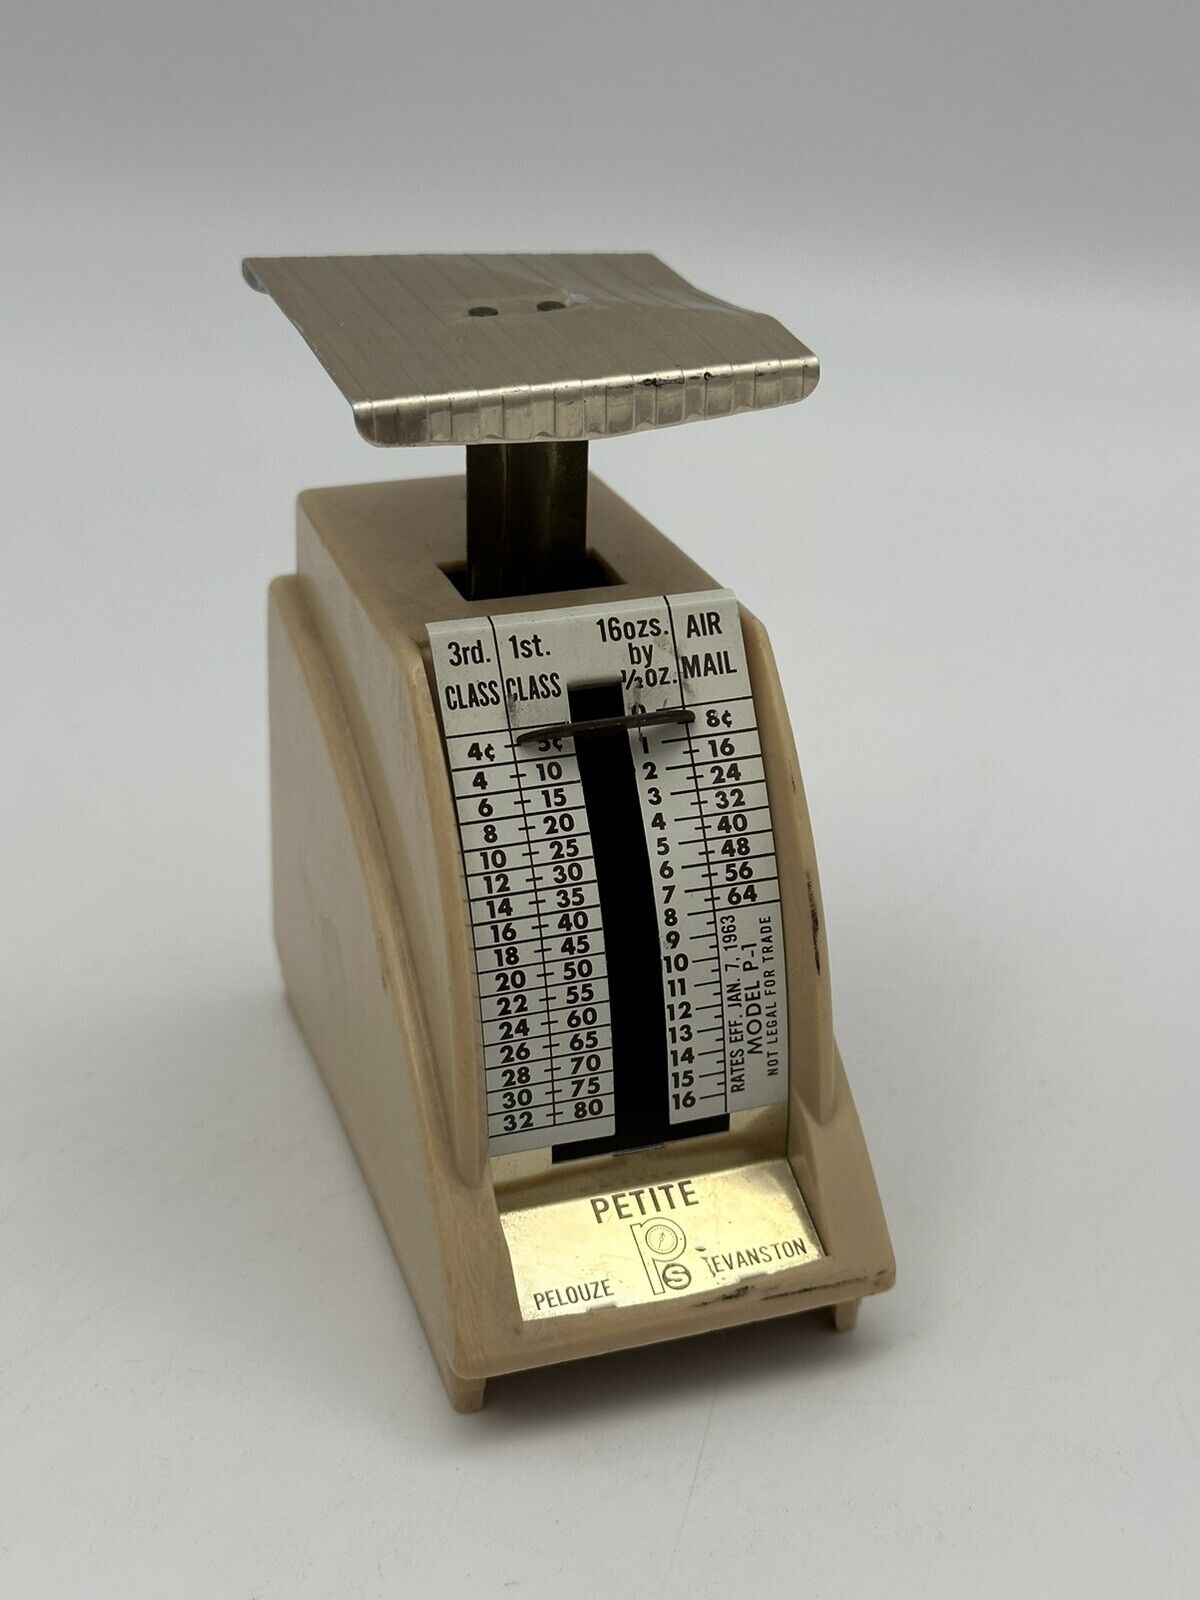 Vintage Mail Scale Petite Pelouze Model P1 Made In USA Evanston 1960’s